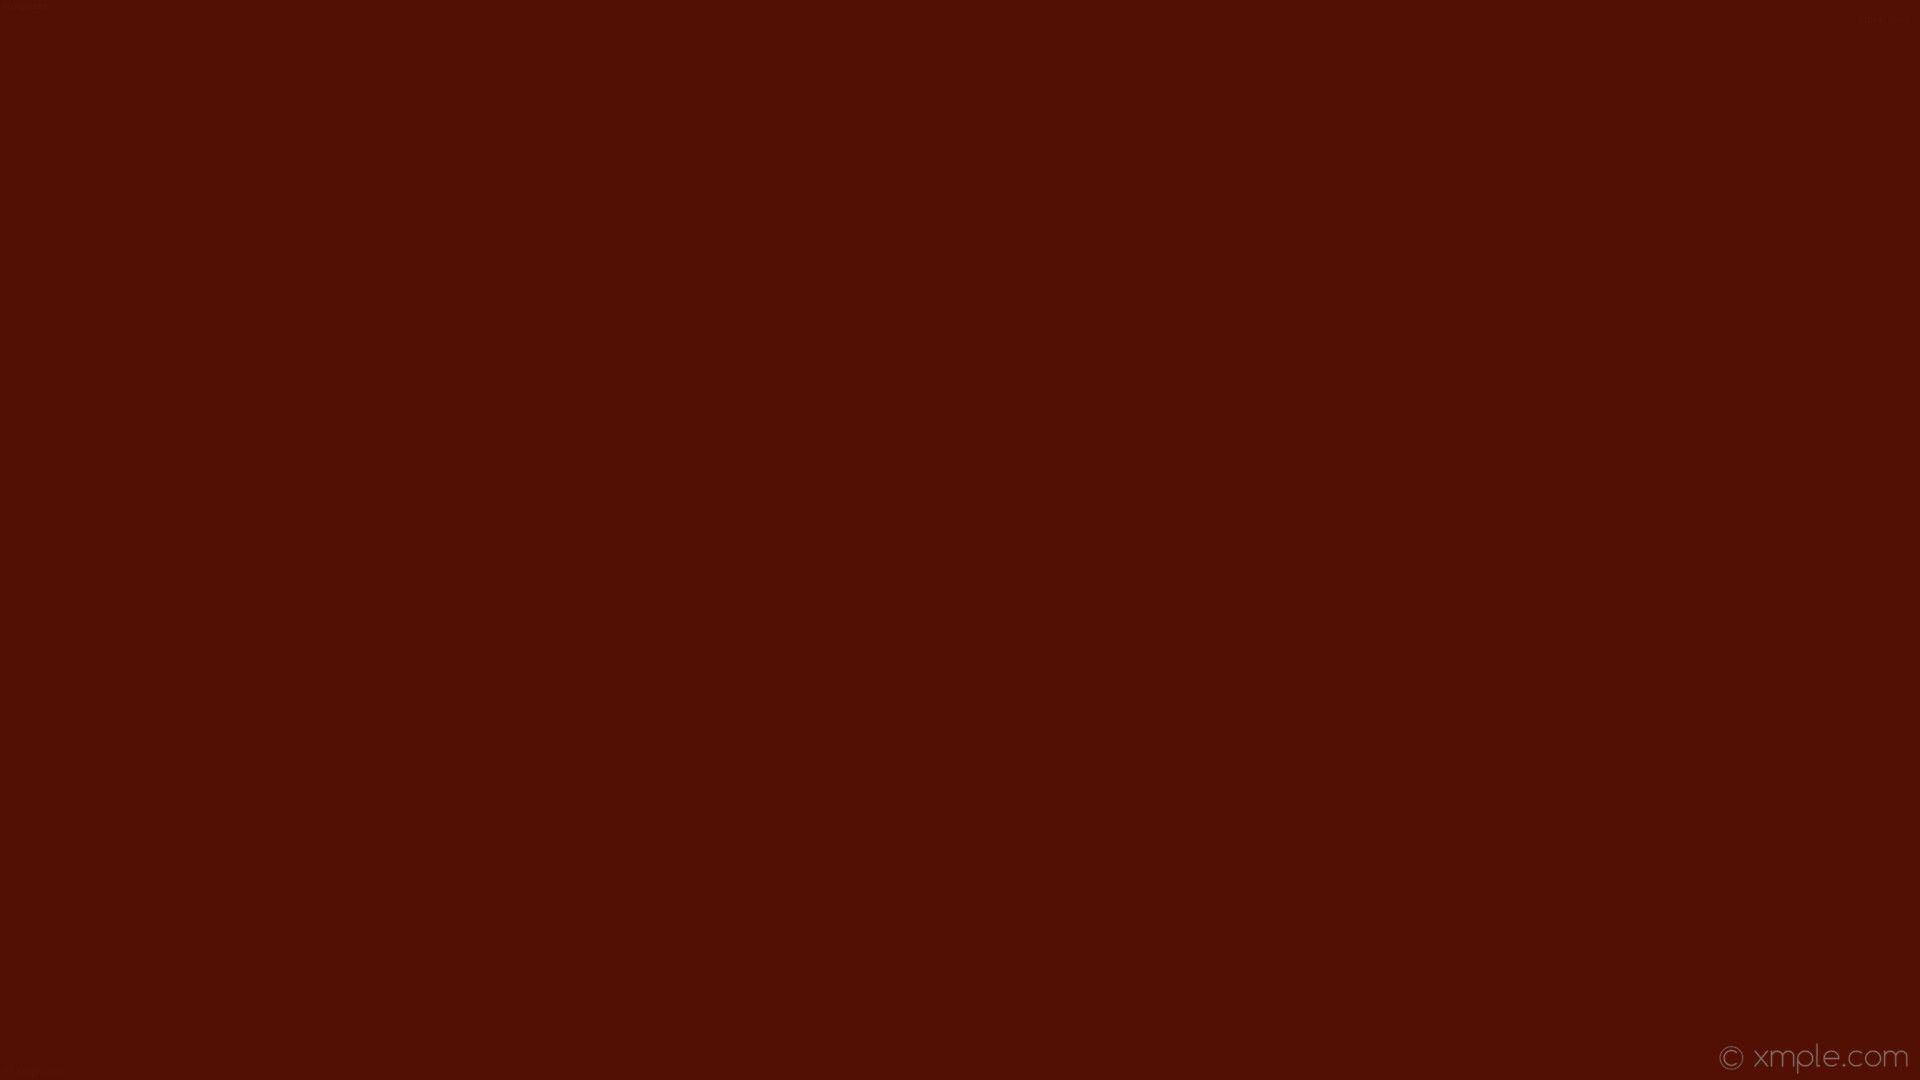 Brown Plain Wallpaper Vector Images over 250